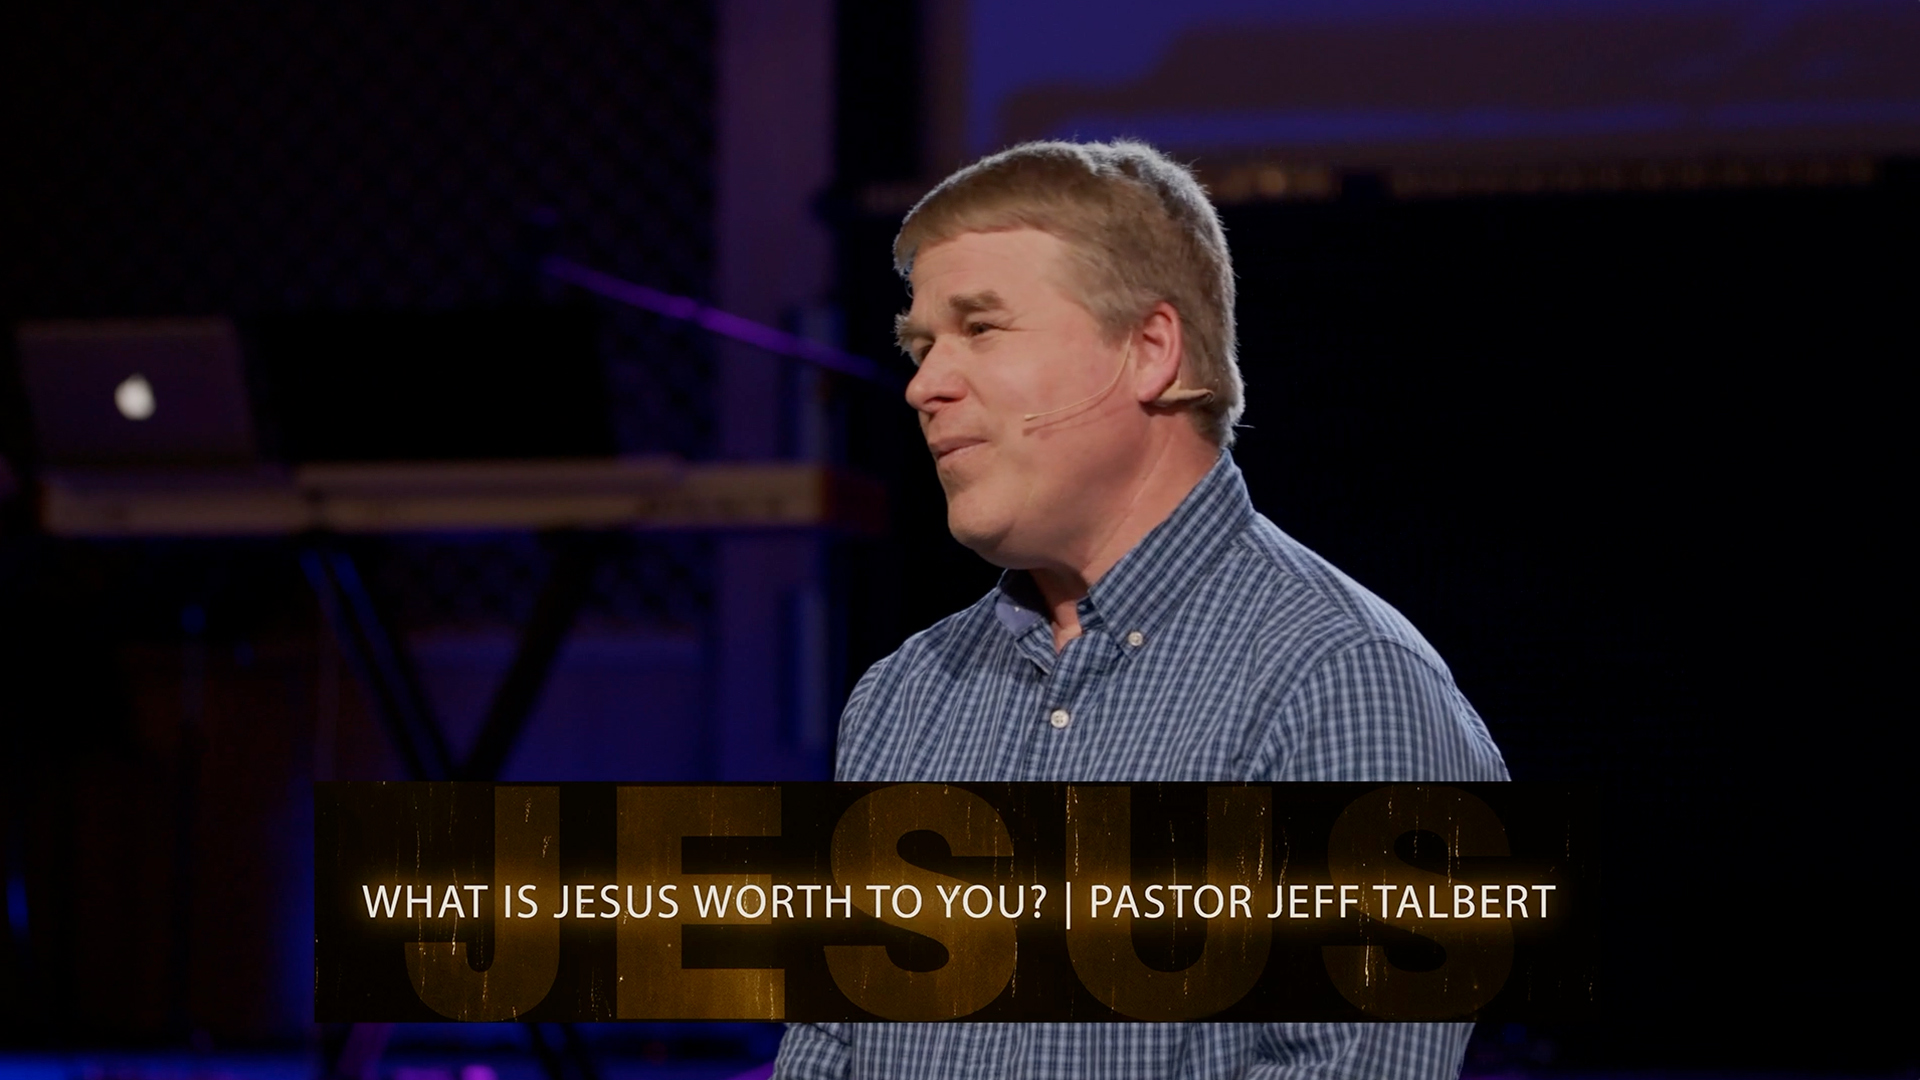 What Is Jesus Worth to You? Image